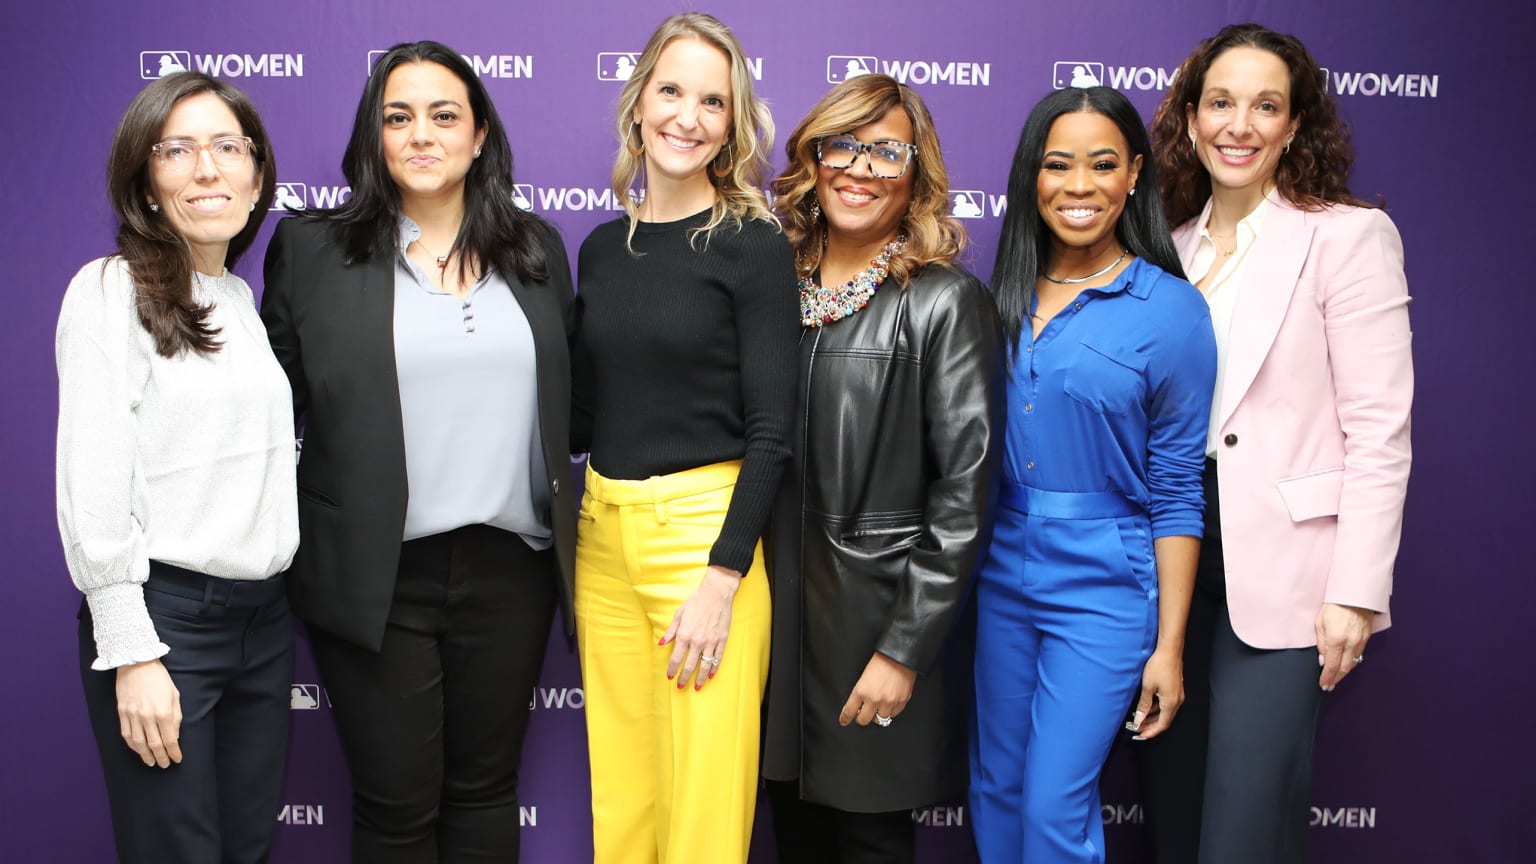 Six women stand in front of a purple backdrop for a photo